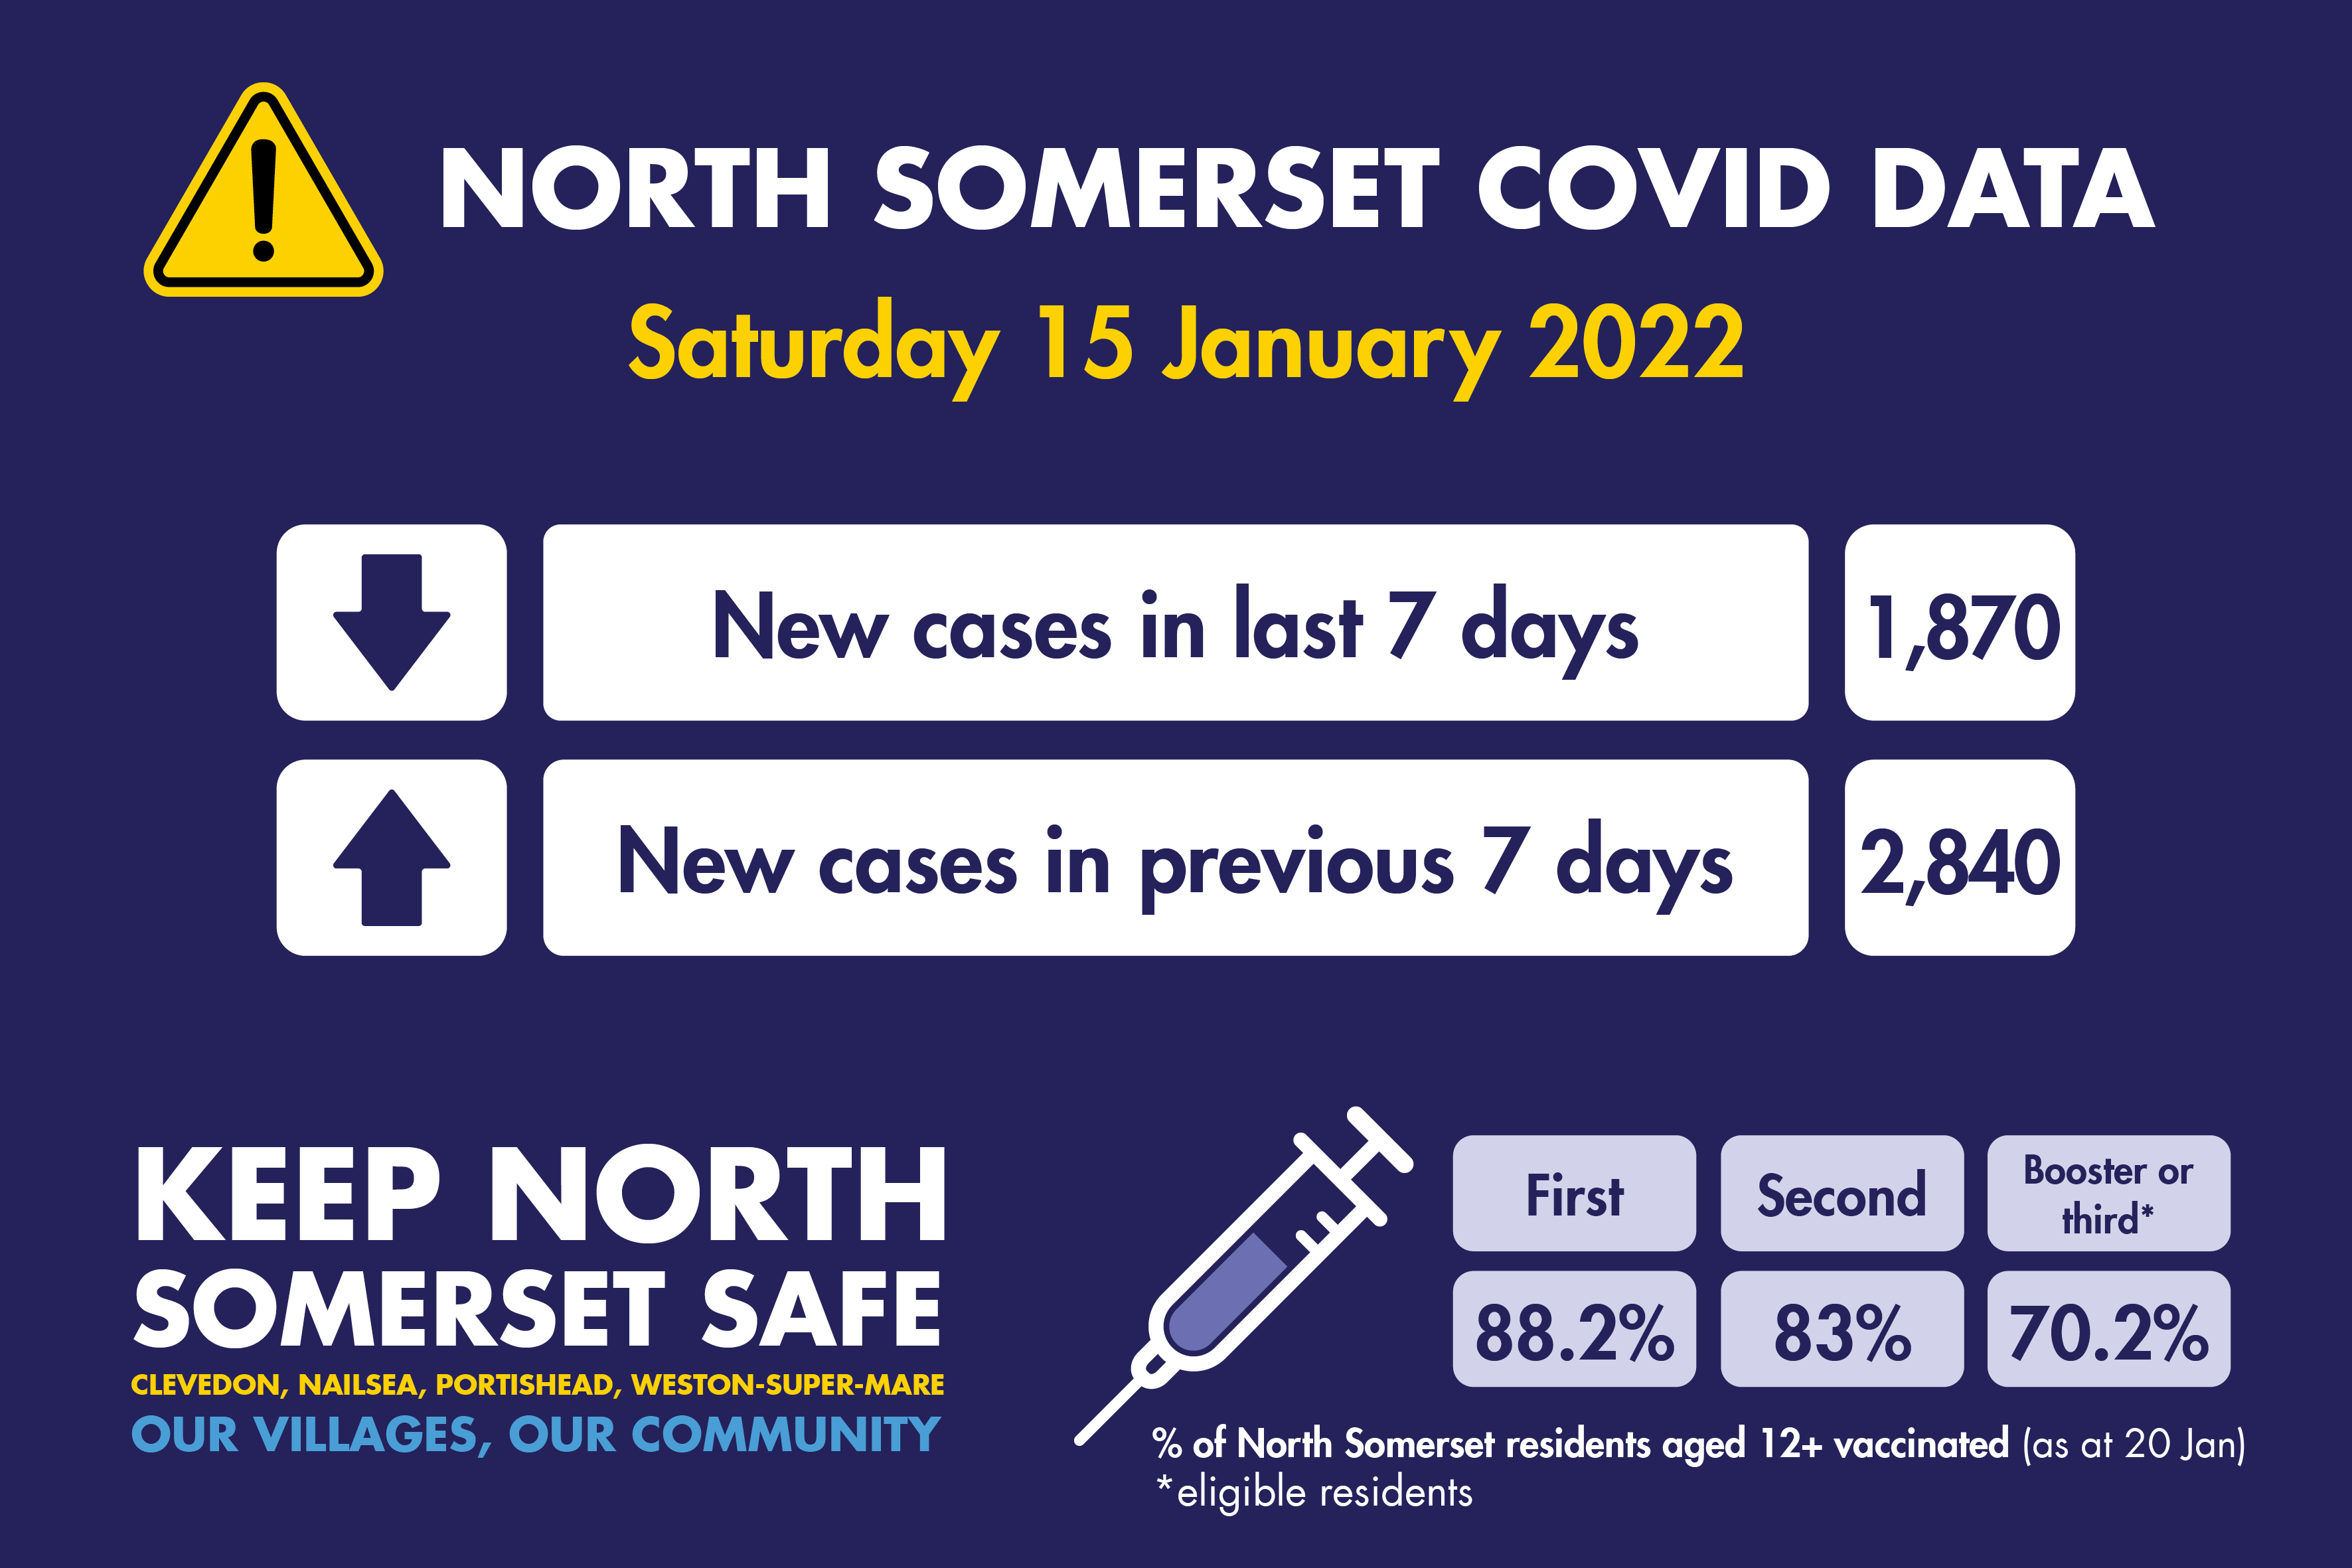 Infographic detailing new coronavirus cases as of Saturday 15 January - there were 1,870 new cases in the last 7 days, compared with 2,840 in the previous week.